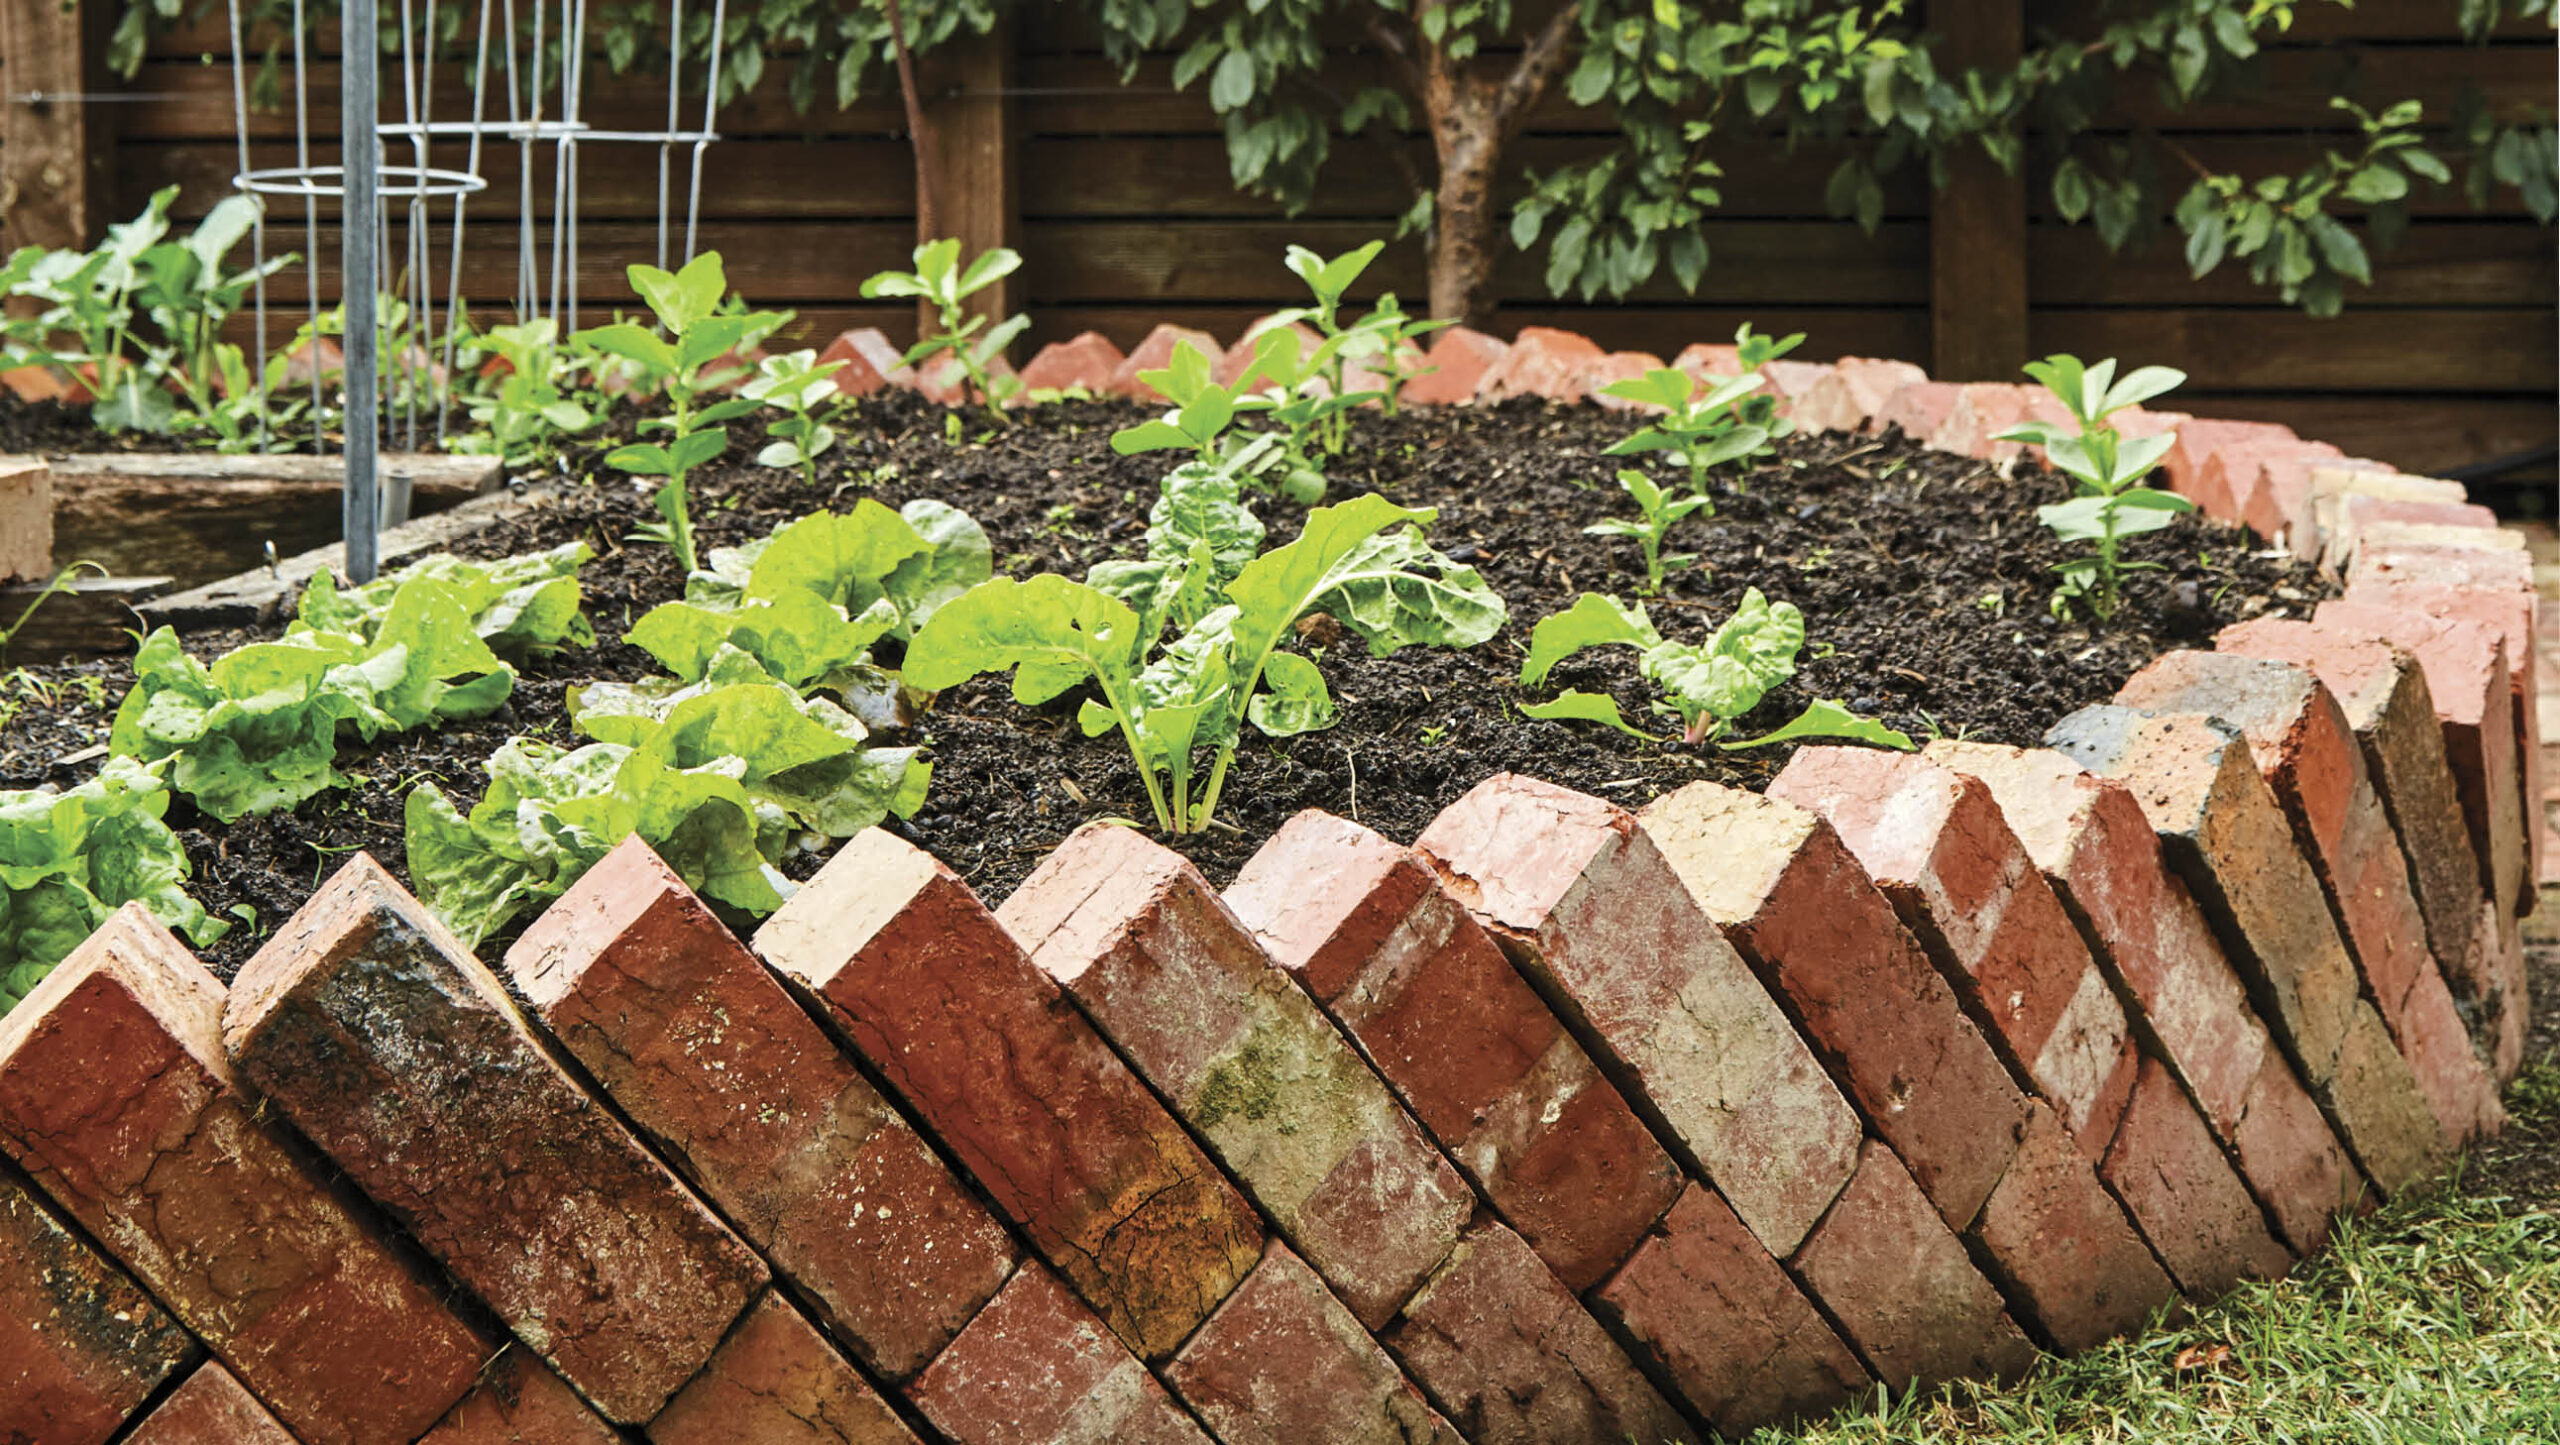 You can repurpose old bricks to build your raised beds.